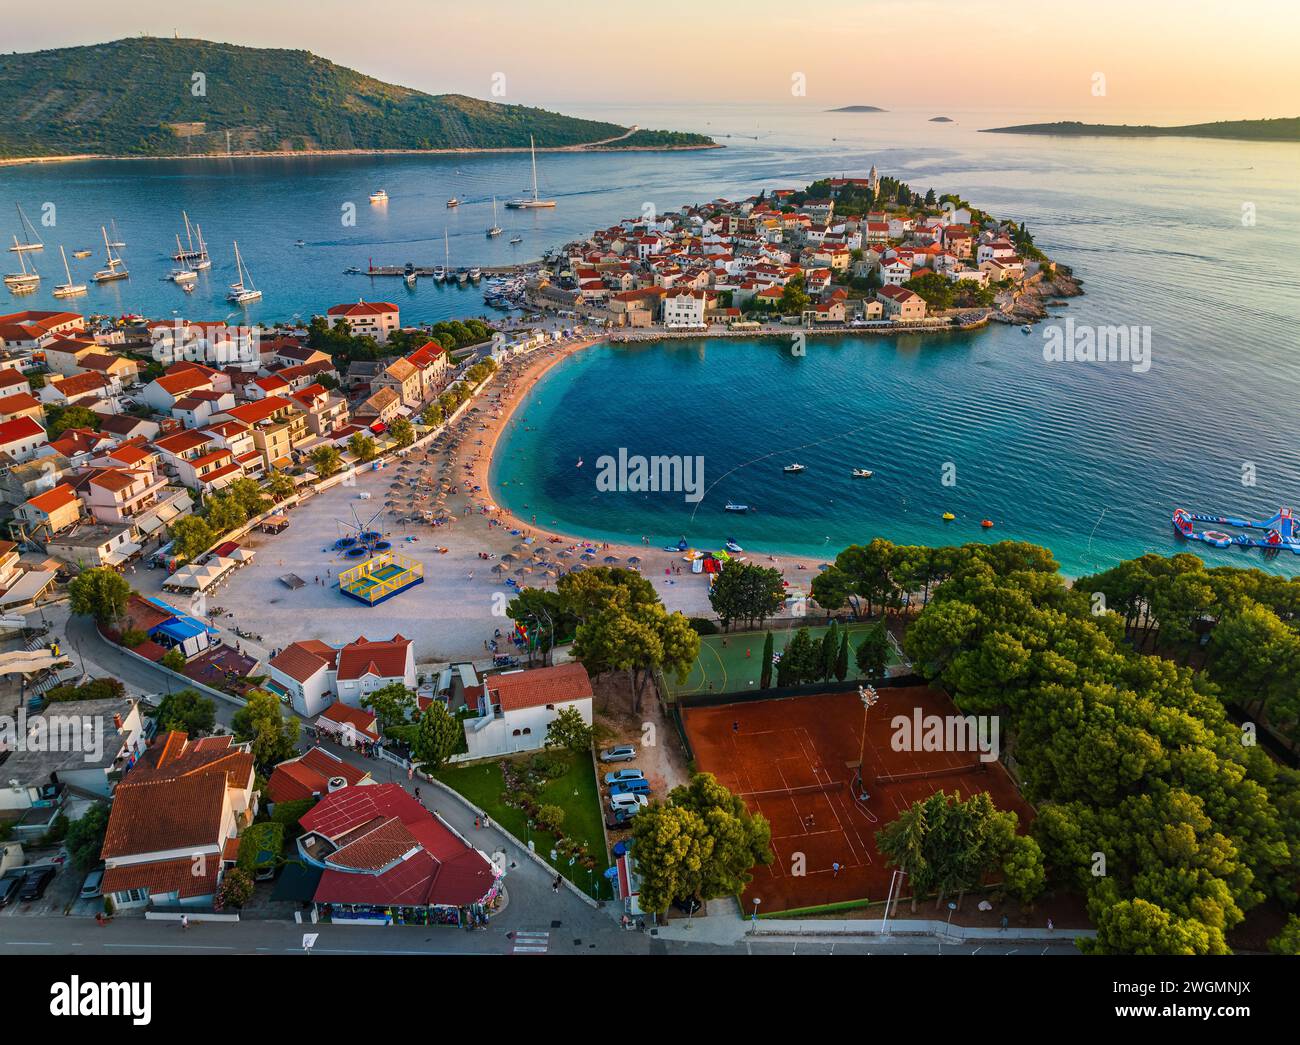 Primosten, Croatia - Aerial view of Primosten peninsula with public beach, tennis courts, St. George's Church and old town on a sunny summer afternoon Stock Photo